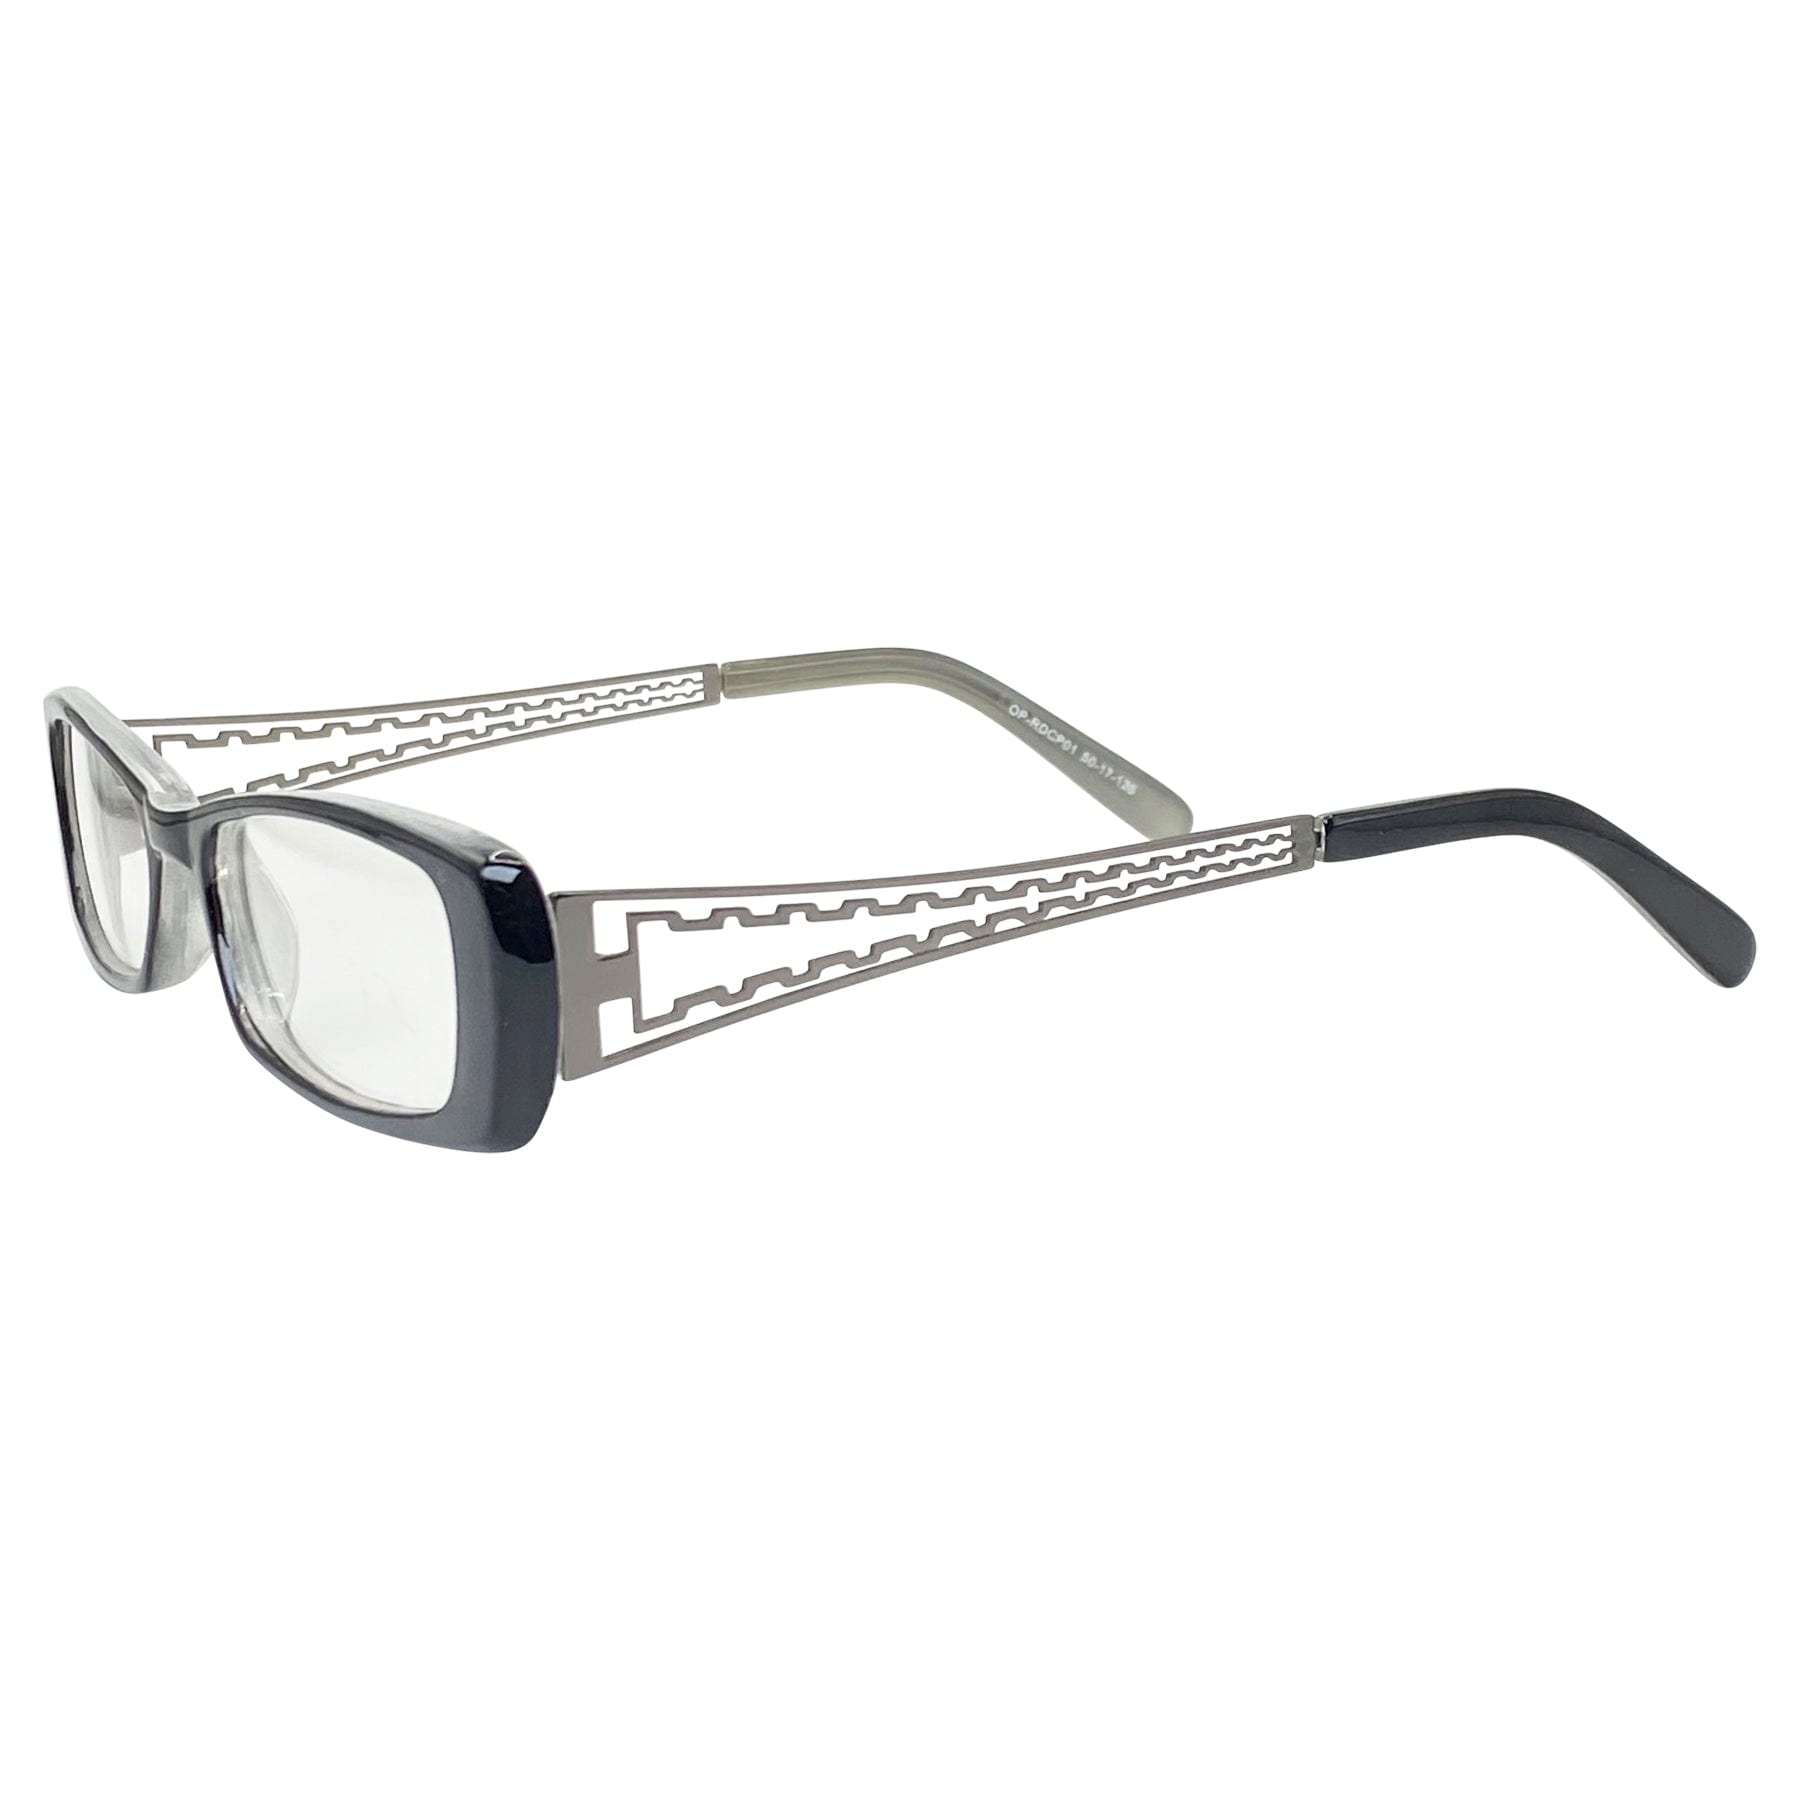 90s retro clear frame with a unique detailing temples